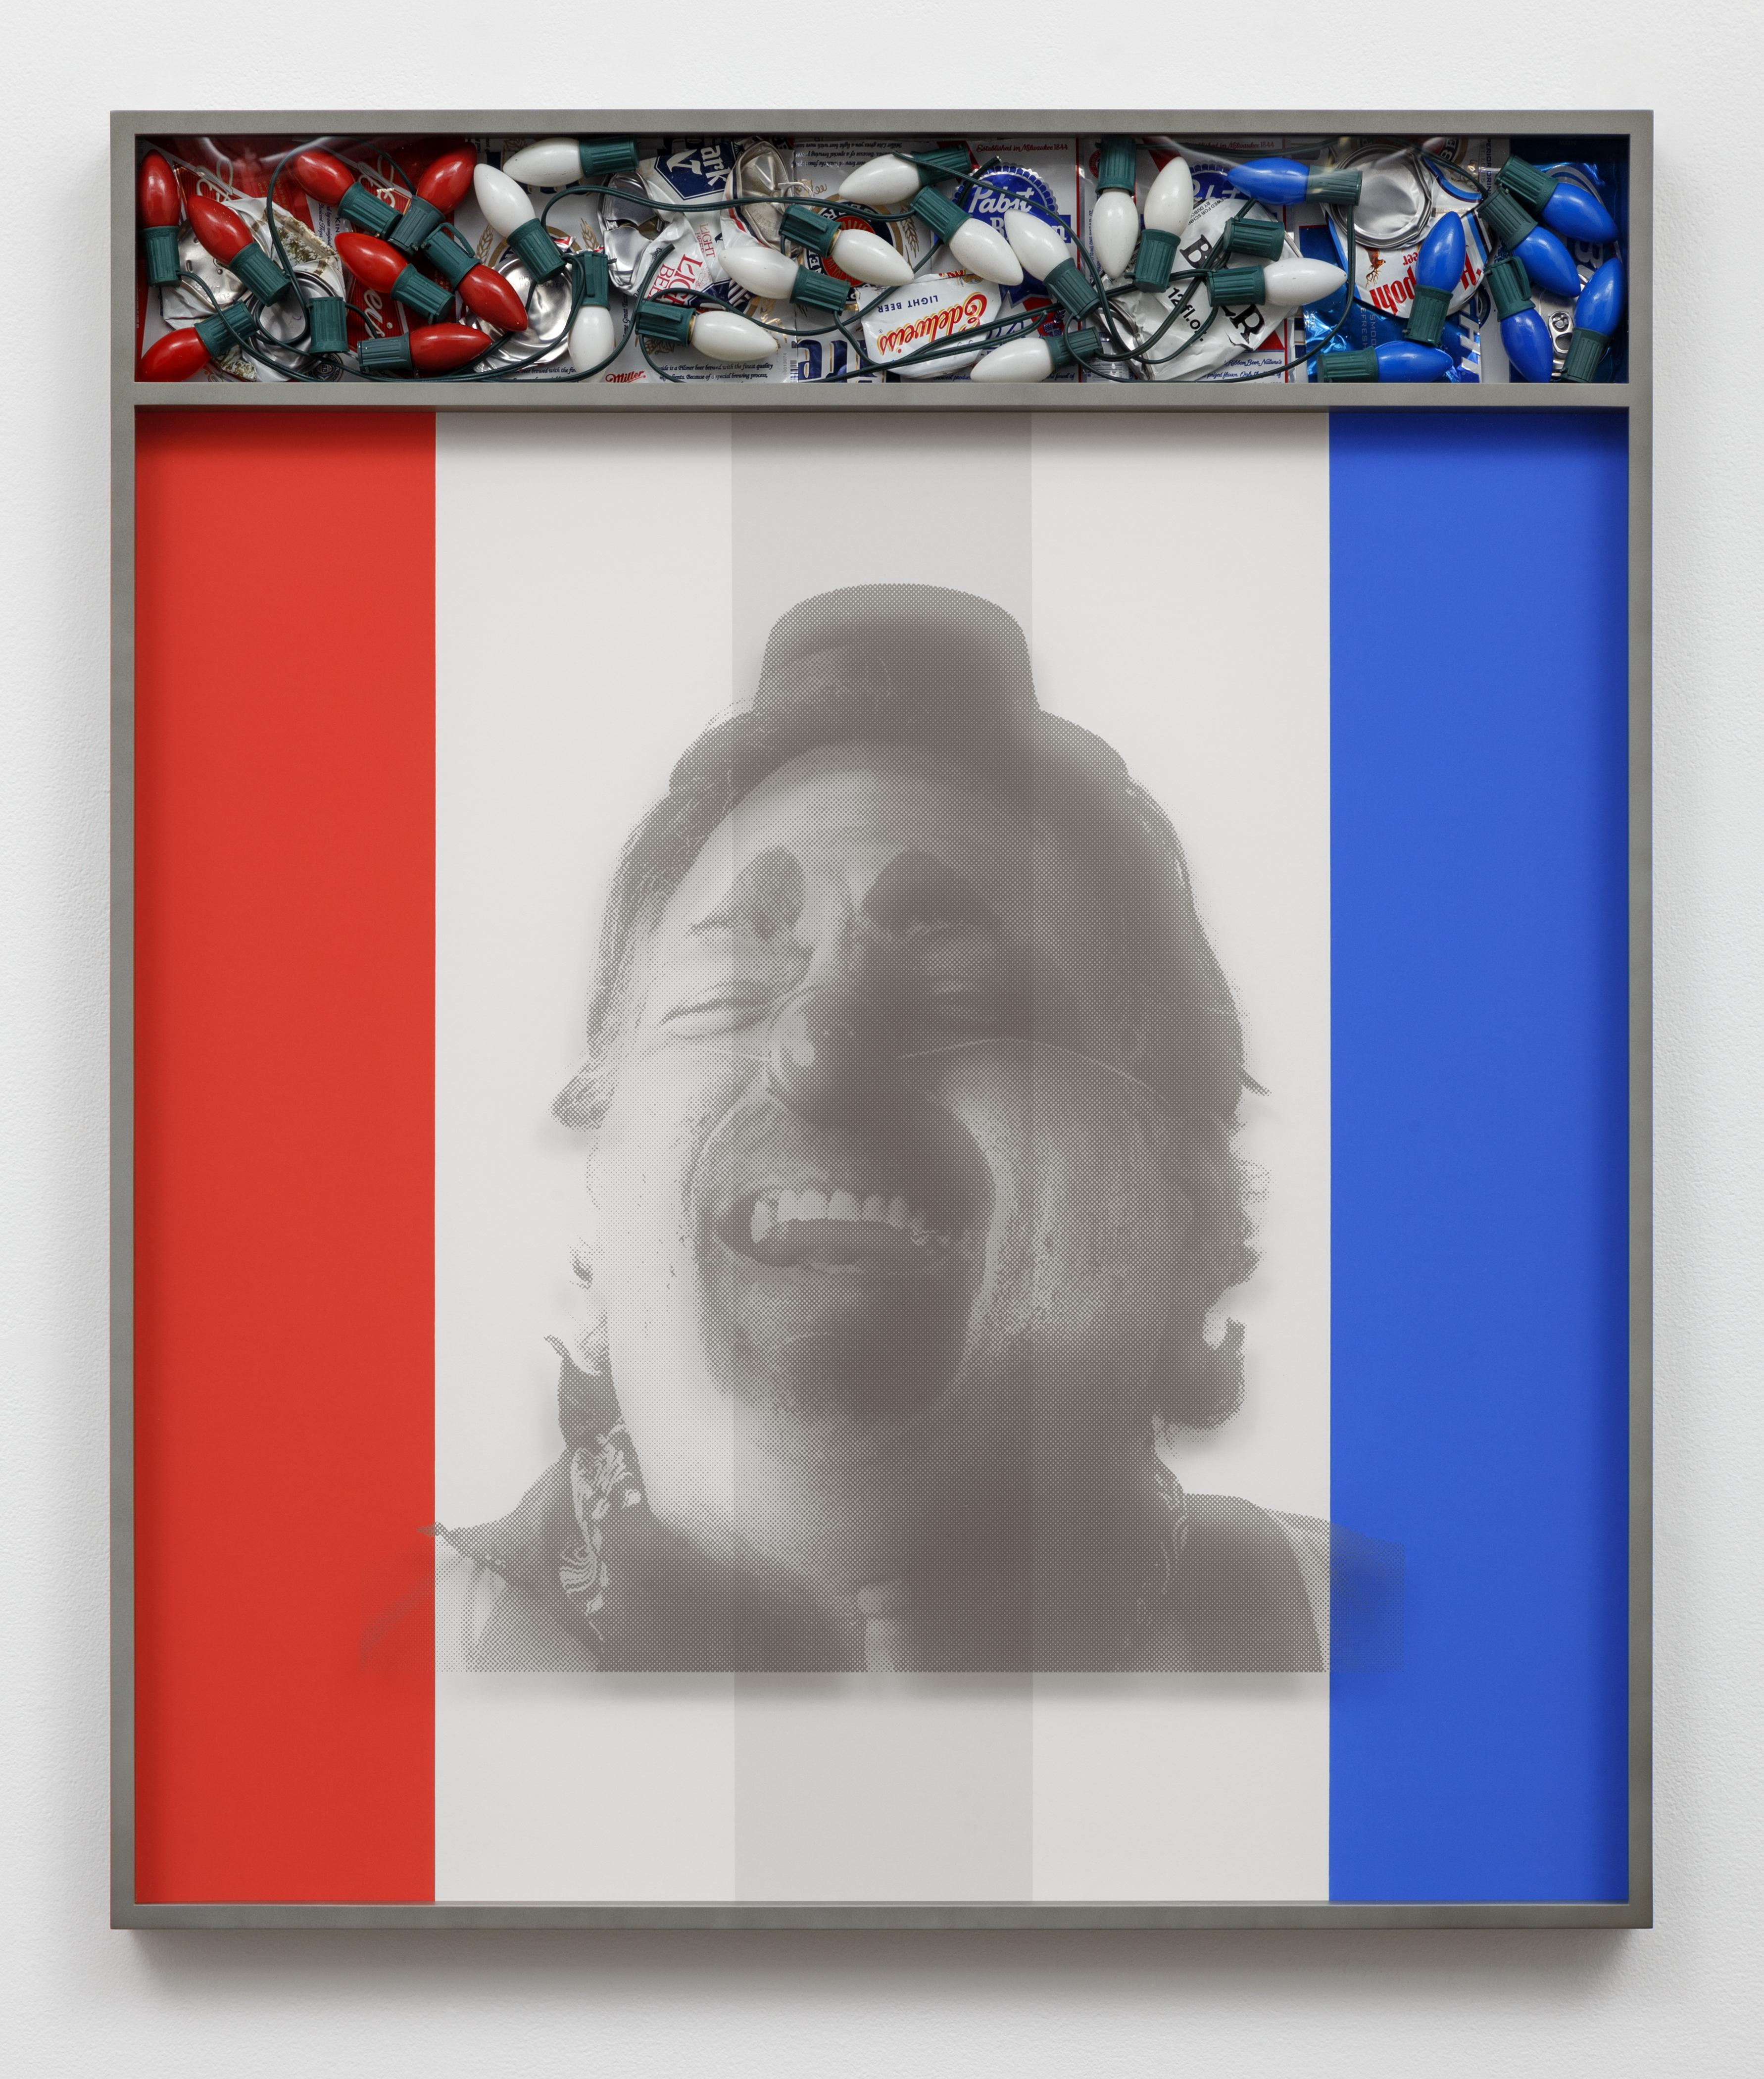 A black and white image of a laughing clown appears on a panel of red, white, and blue vertical stripes inside a gray frame. Inside the frame, above the image, a cubbyhole is filled with holiday lights and campaign buttons in red, white, and blue sections that mirror the stripes below.